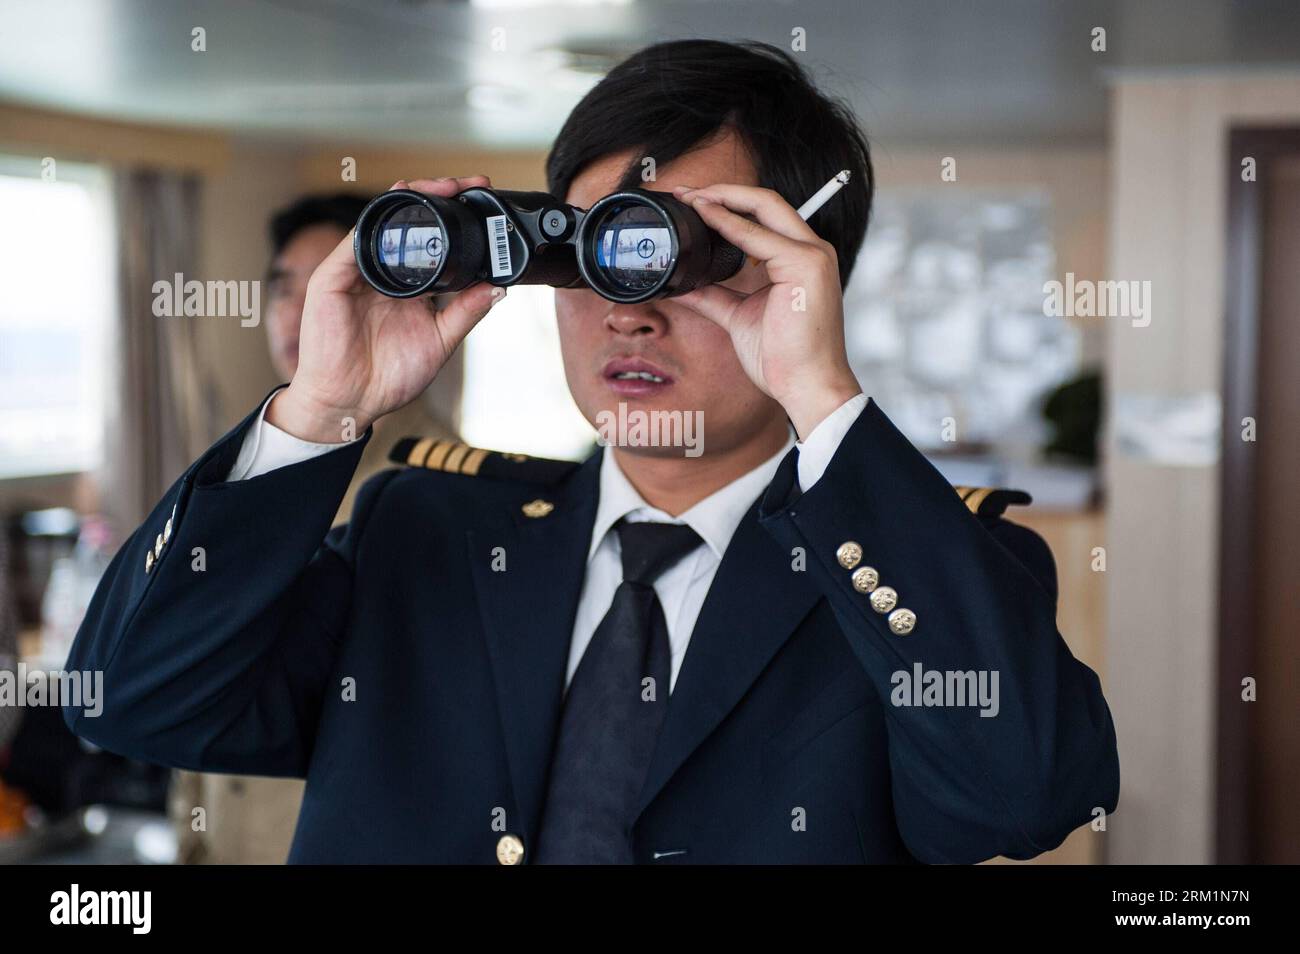 Bildnummer: 59604368  Datum: 24.04.2013  Copyright: imago/Xinhua NANJING, - Zhu Hui checks sailing conditions using telescope aboard the Maple Star on the Yangtze River in east China s Jiangsu Province, April 24, 2013. Wang Lianmiao and Zhu Hui arrived at the port of Jingjiang on the morning of April 24, 2013. Both men are inland waterway pilots from the Yangtze River Pilot Centre. Awaiting them was the Maple Star, a 180-meter-long Marshall Islands-flagged cargo ship with a gross register tonnage of over 23,000. Under their pilotage, the Maple Star was to veer 180 degrees and head downstream t Stock Photo